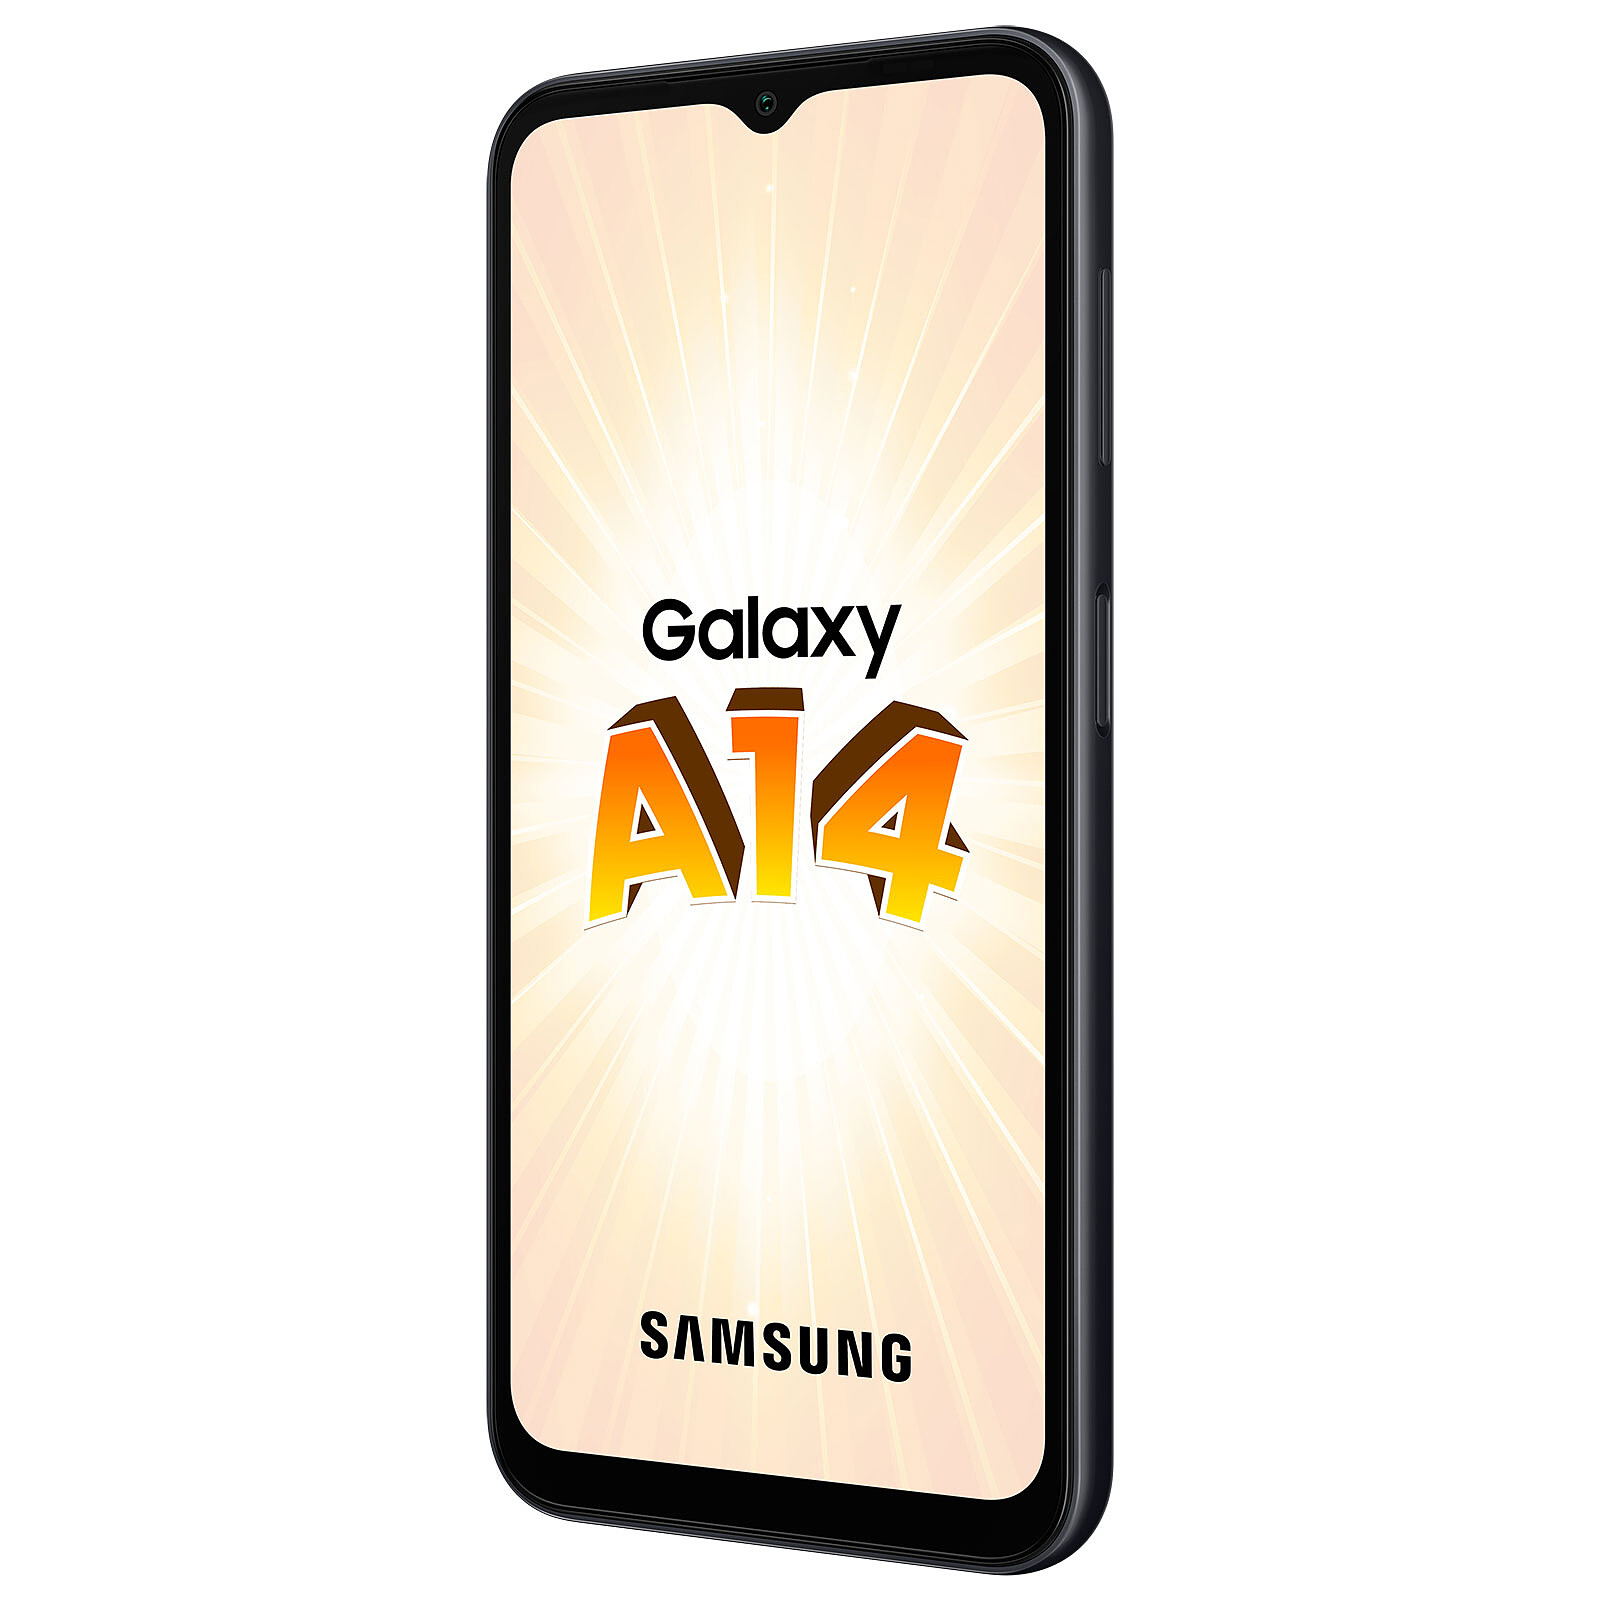 Samsung Galaxy A14 LTE smartphone review - Is this an update